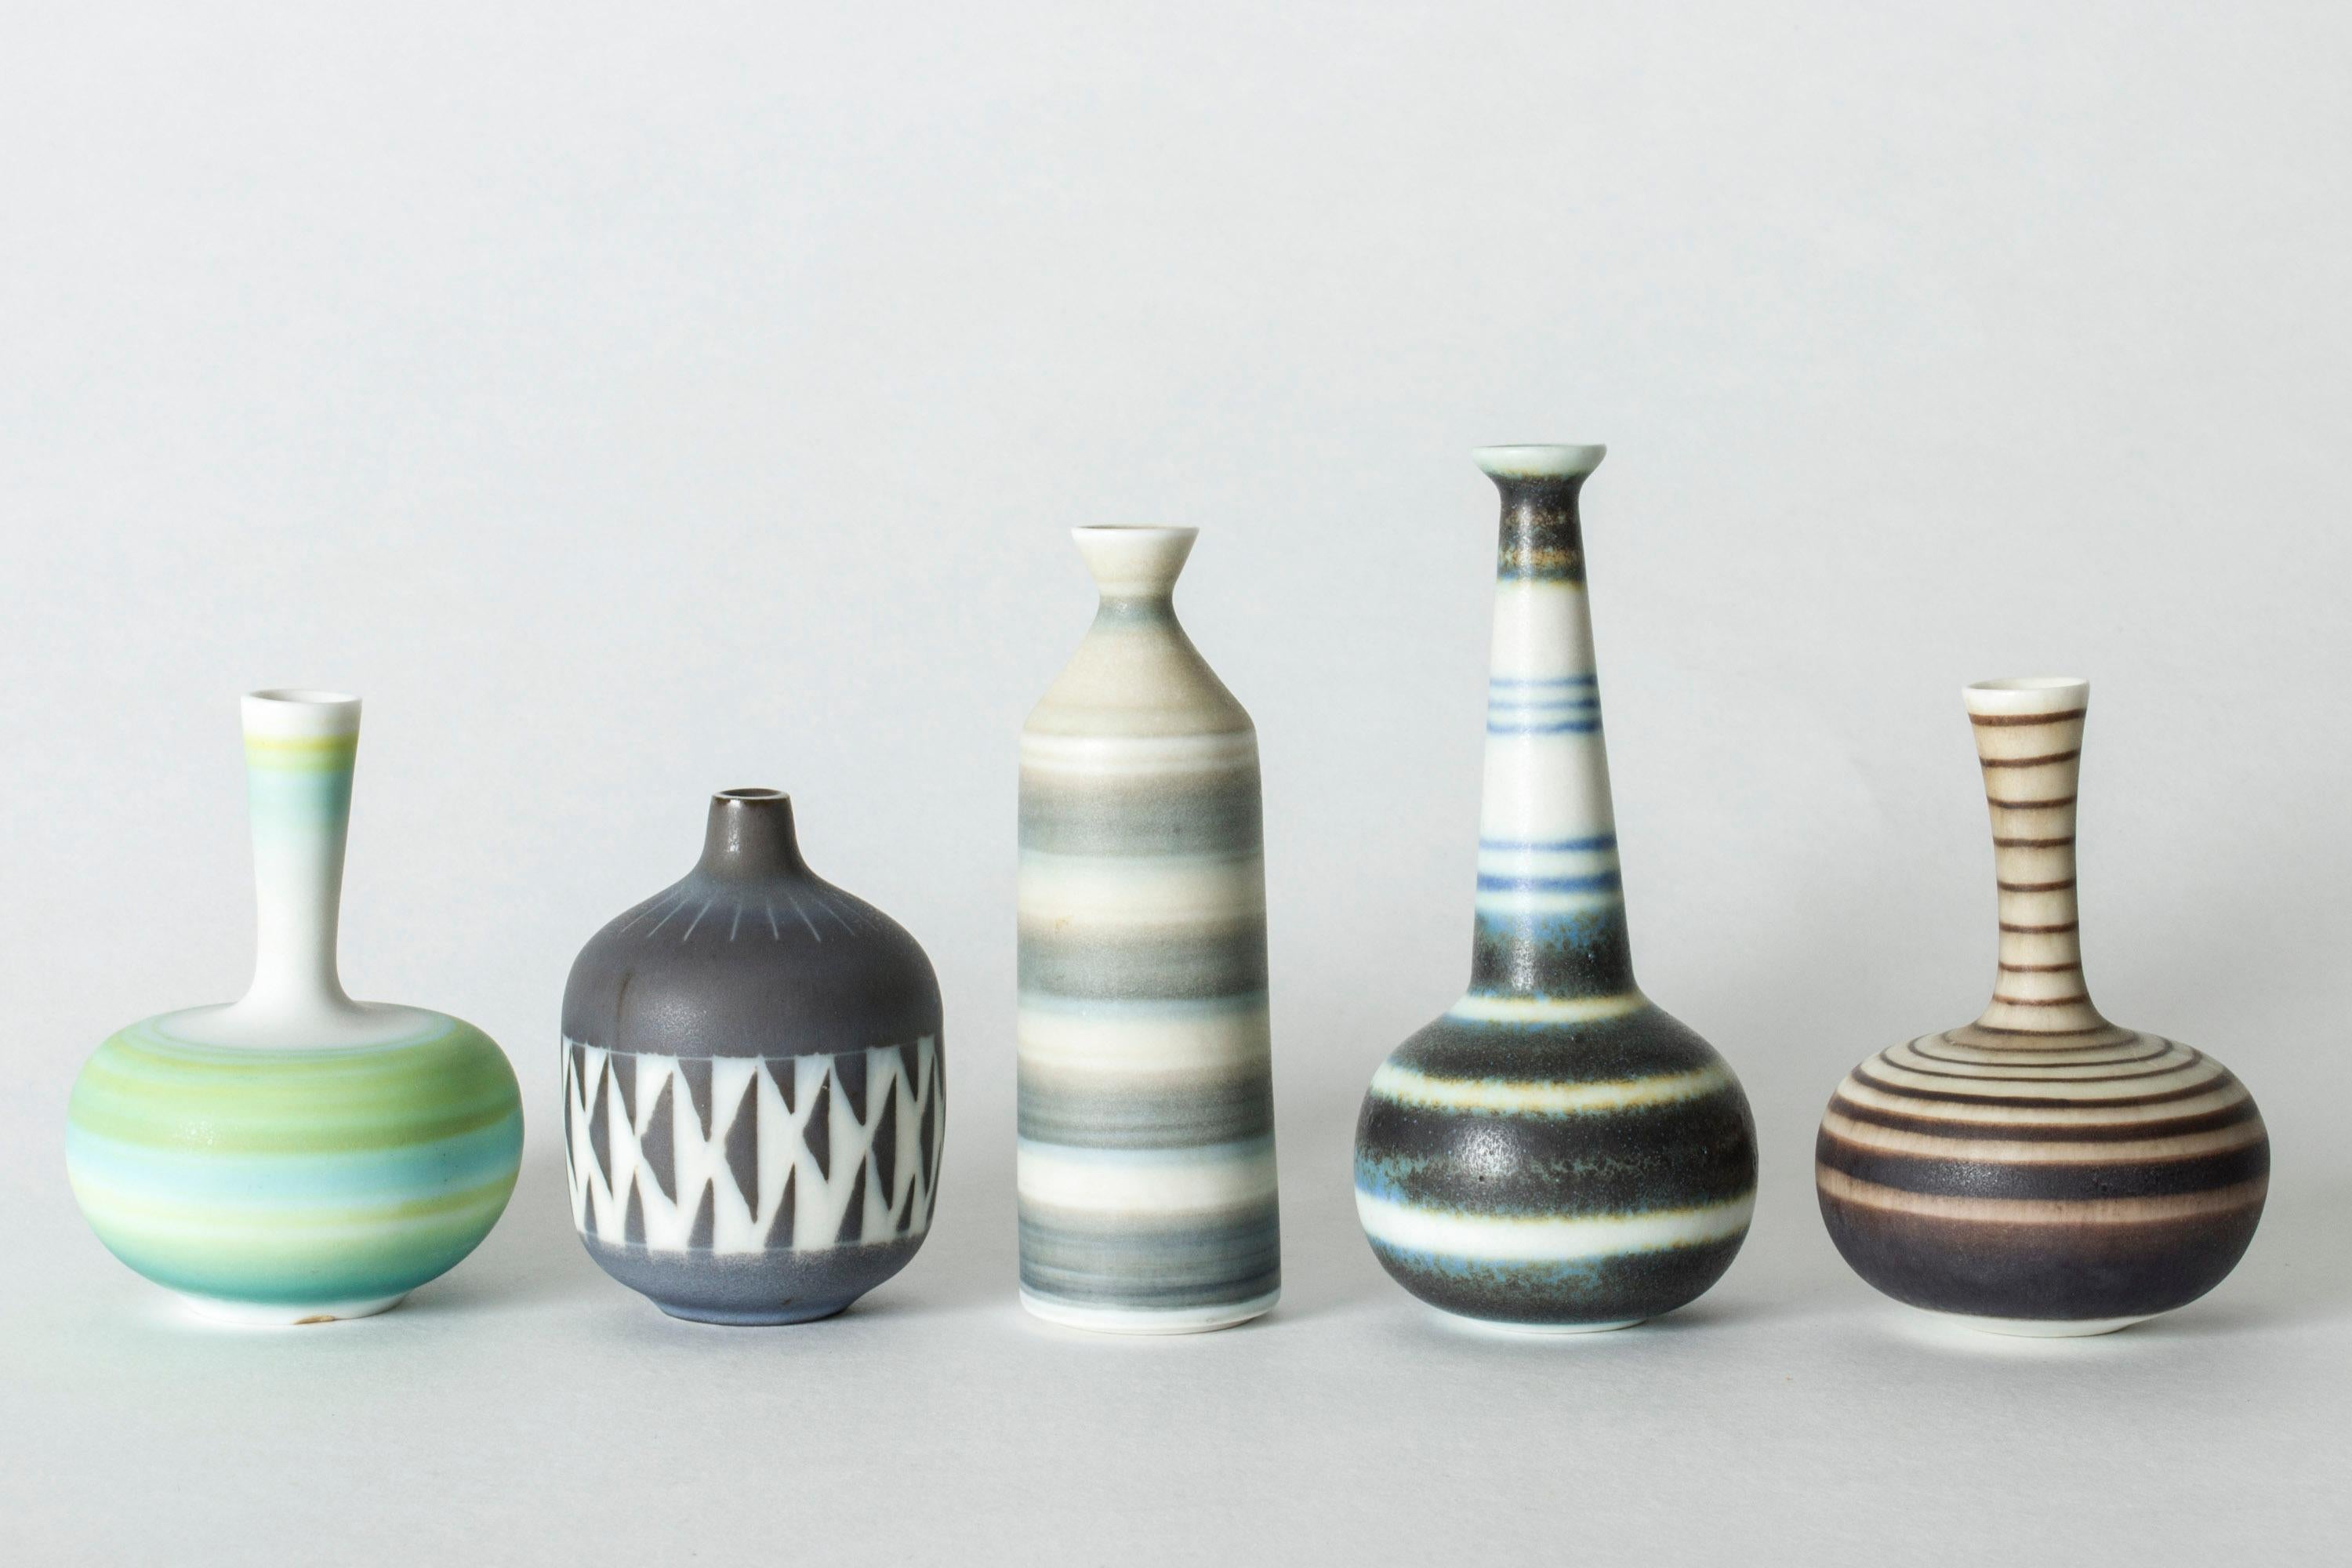 Collection of Nine Miniature Stoneware Vases and Bowls by Gunnar Nylund 2